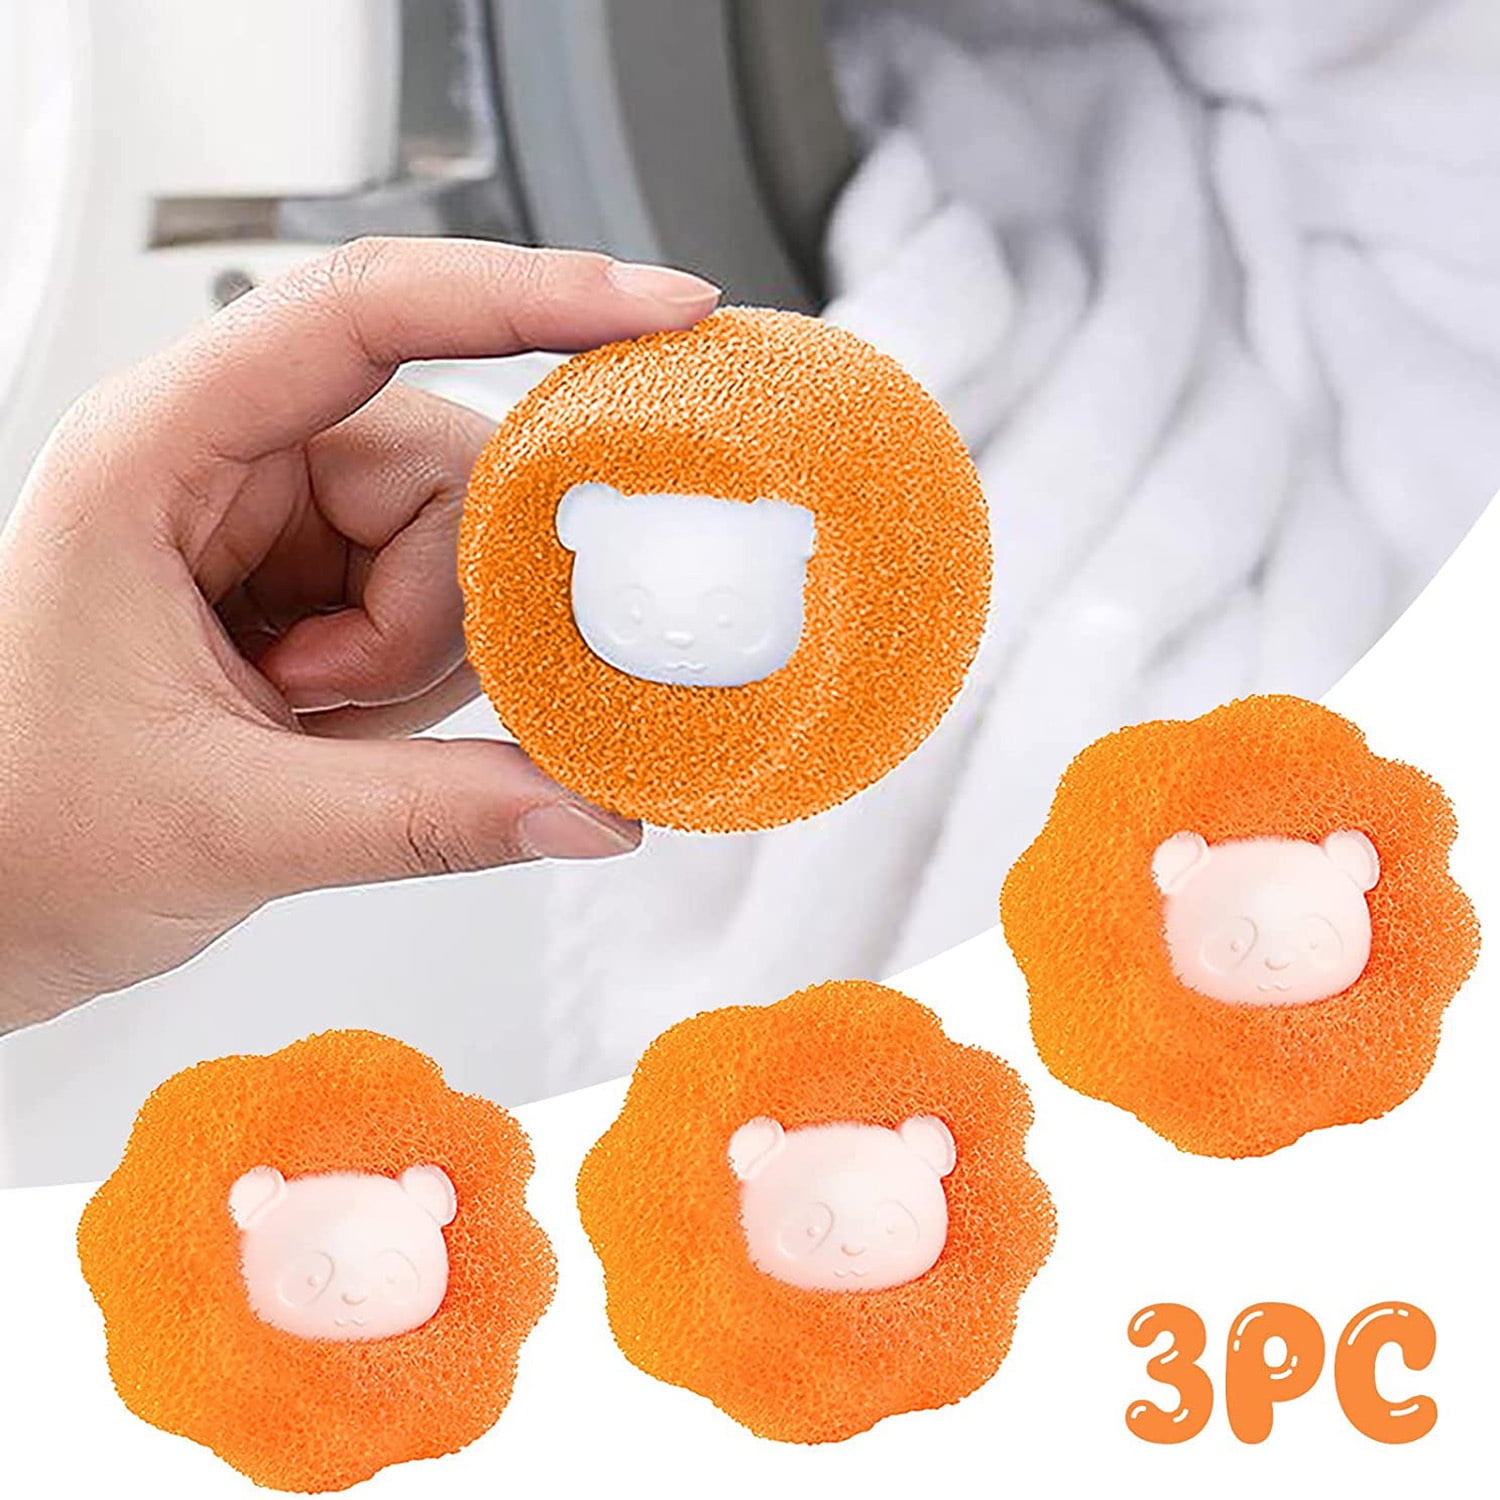 6pc Pet Fur Catcher Filtering Hair Removal Device Wool Cleaning Supplies US 